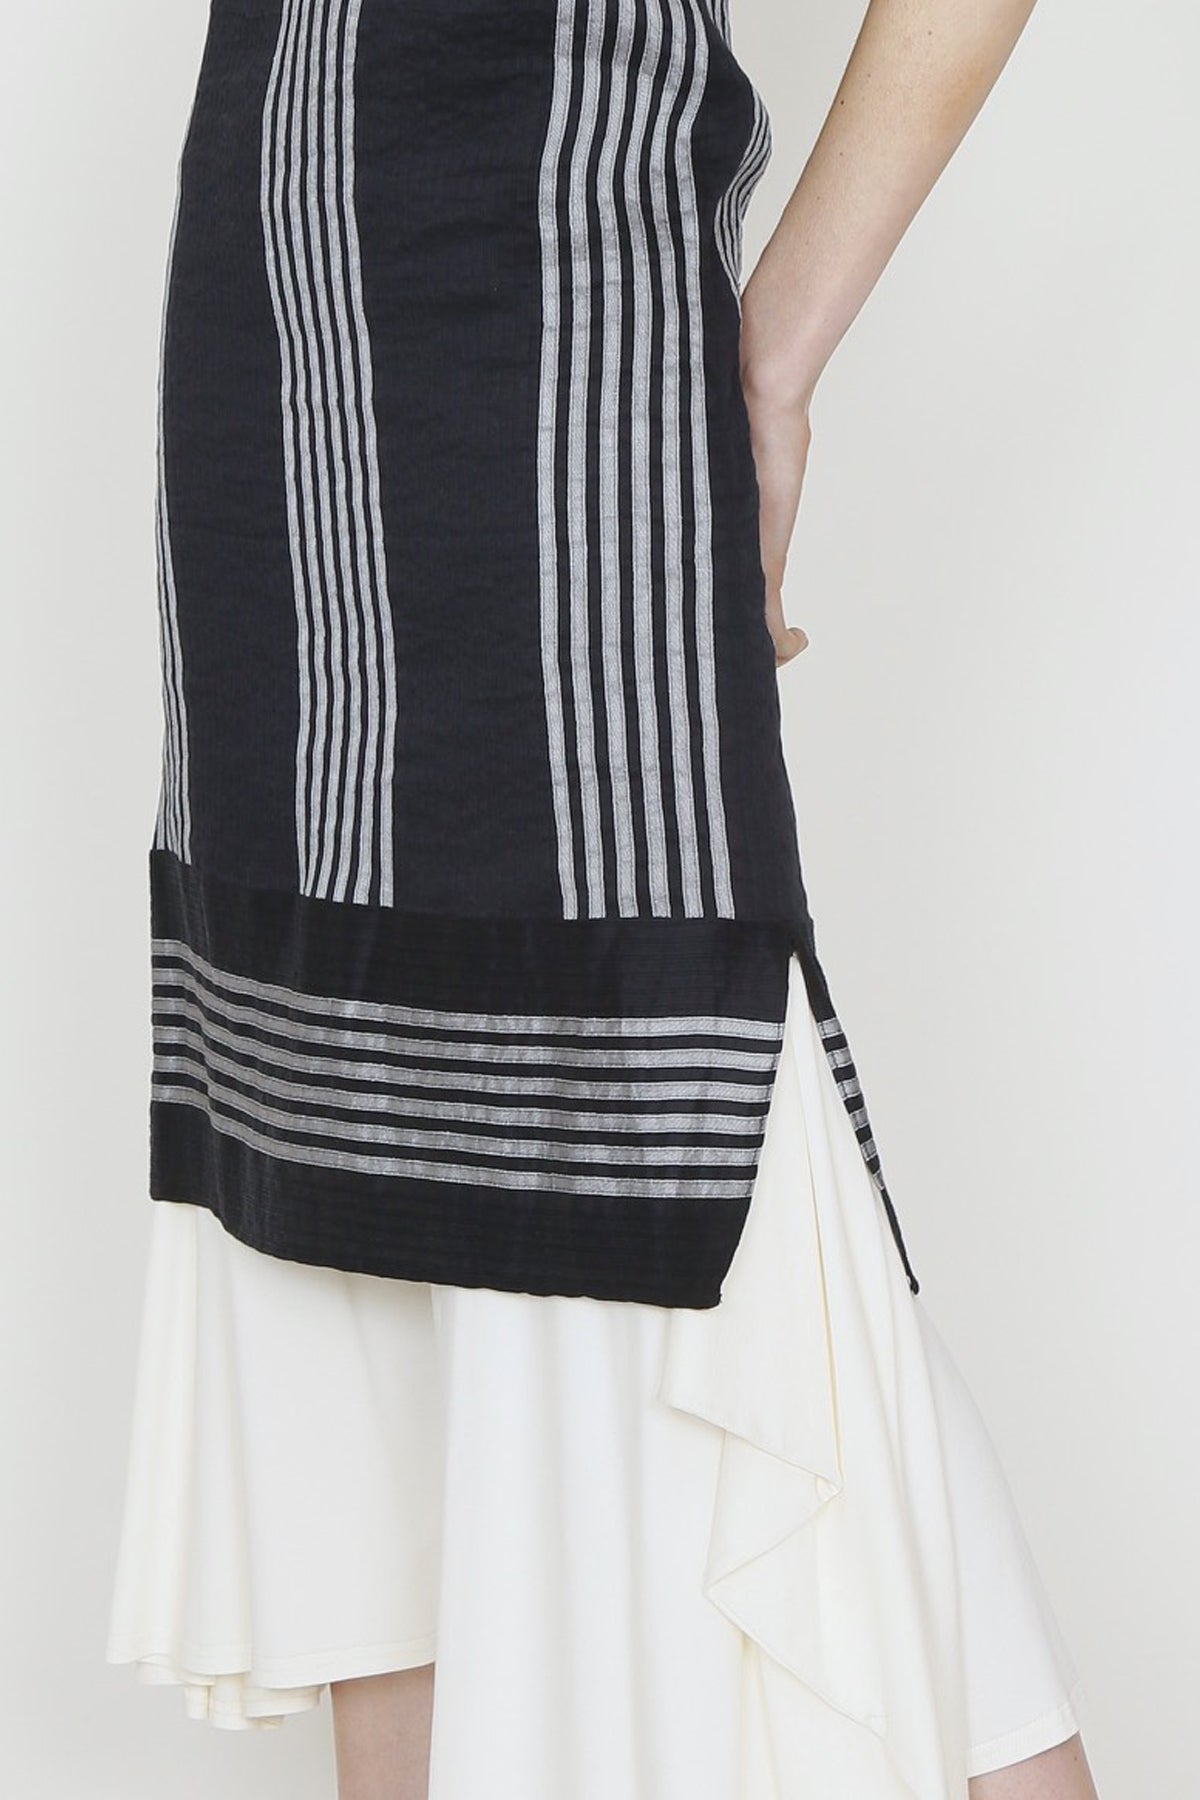 White and Navy Linen and Silk Blend Striped Fitted Sun Dress with Side Slits